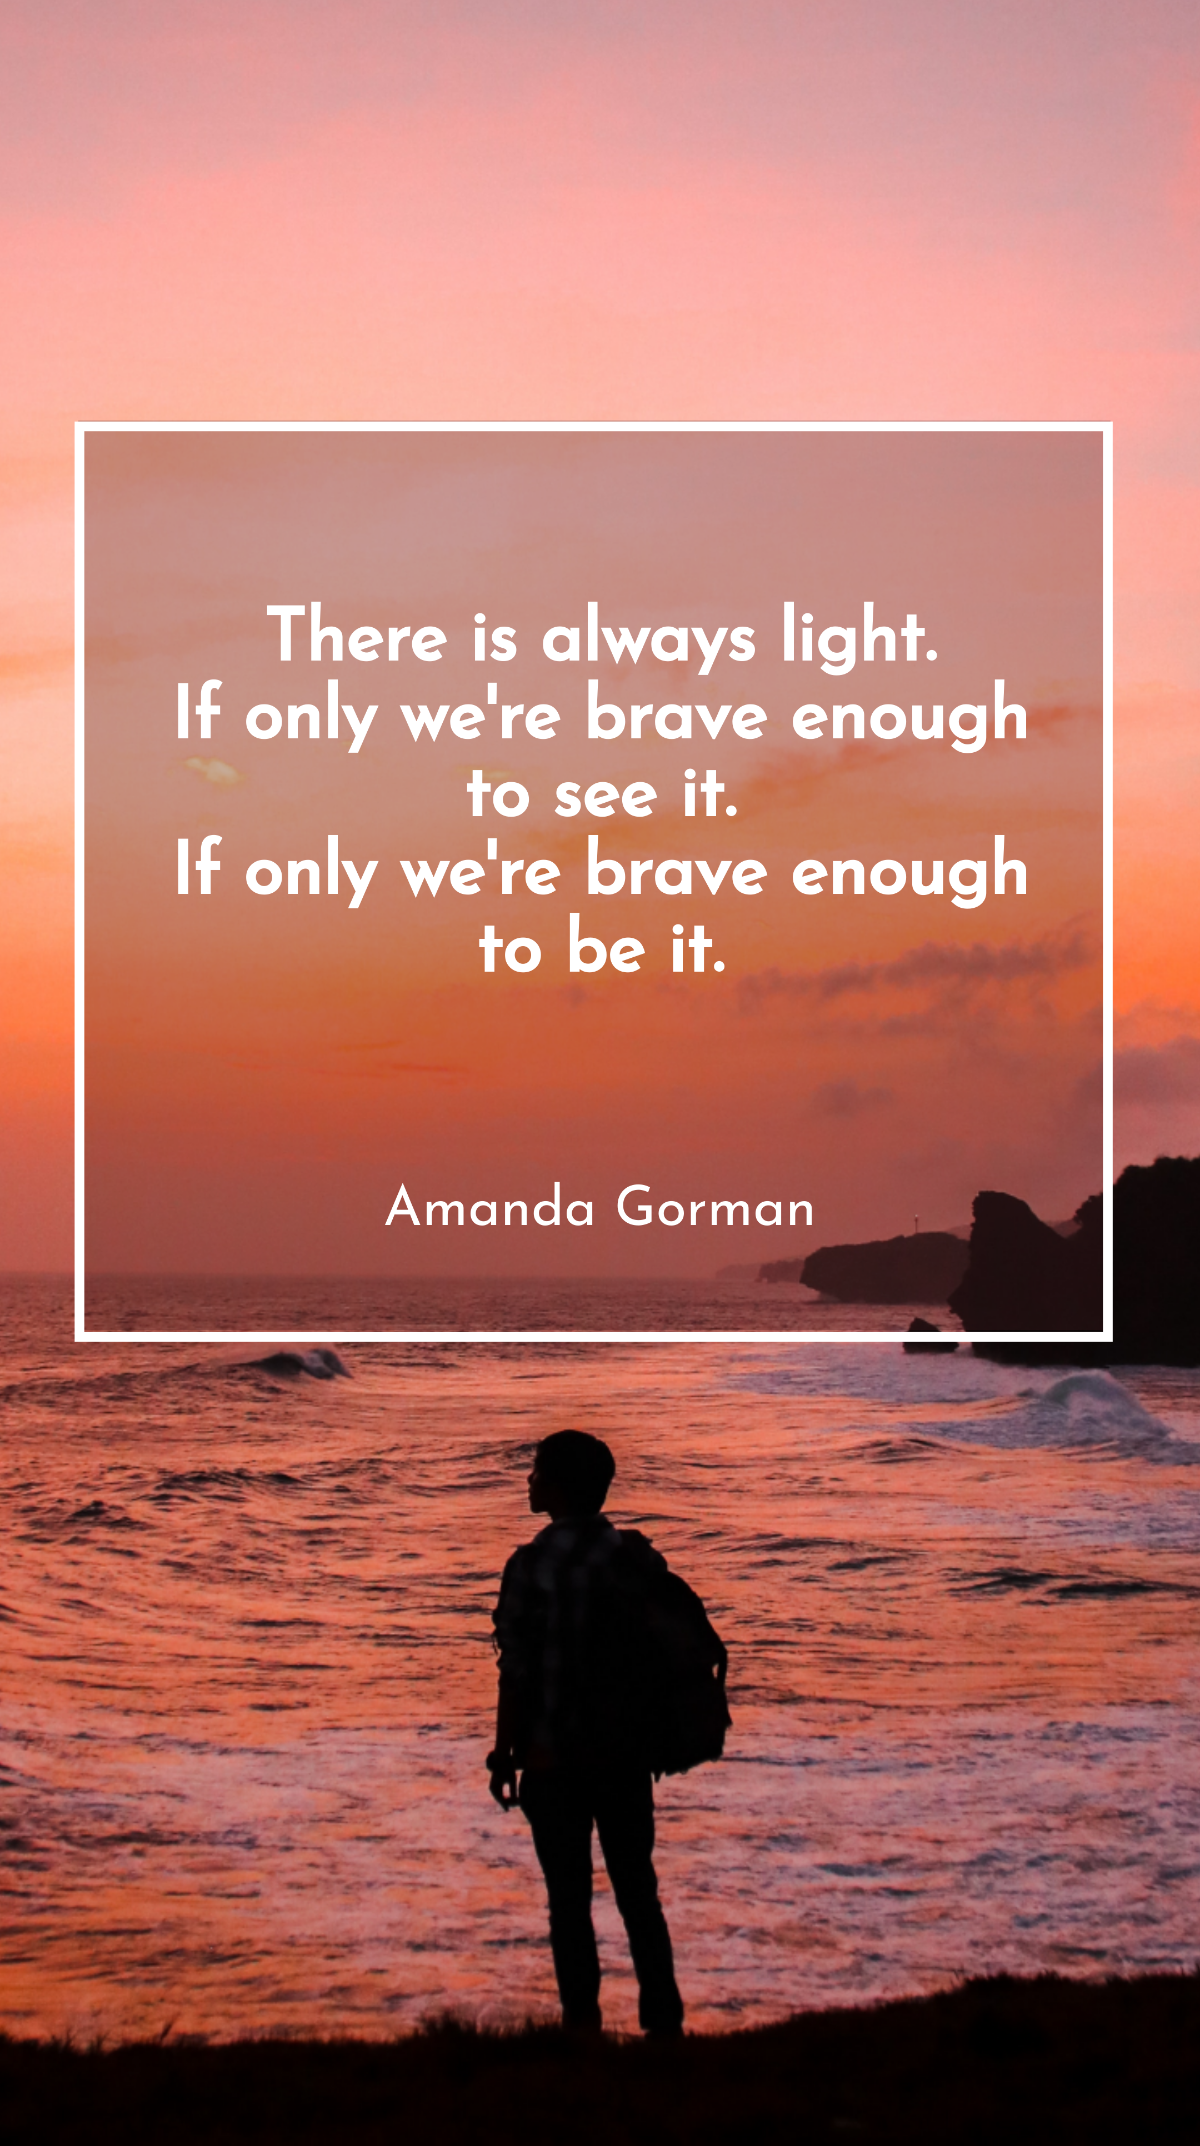 Amanda Gorman - There is always light. If only we're brave enough to see it. If only we're brave enough to be it Template